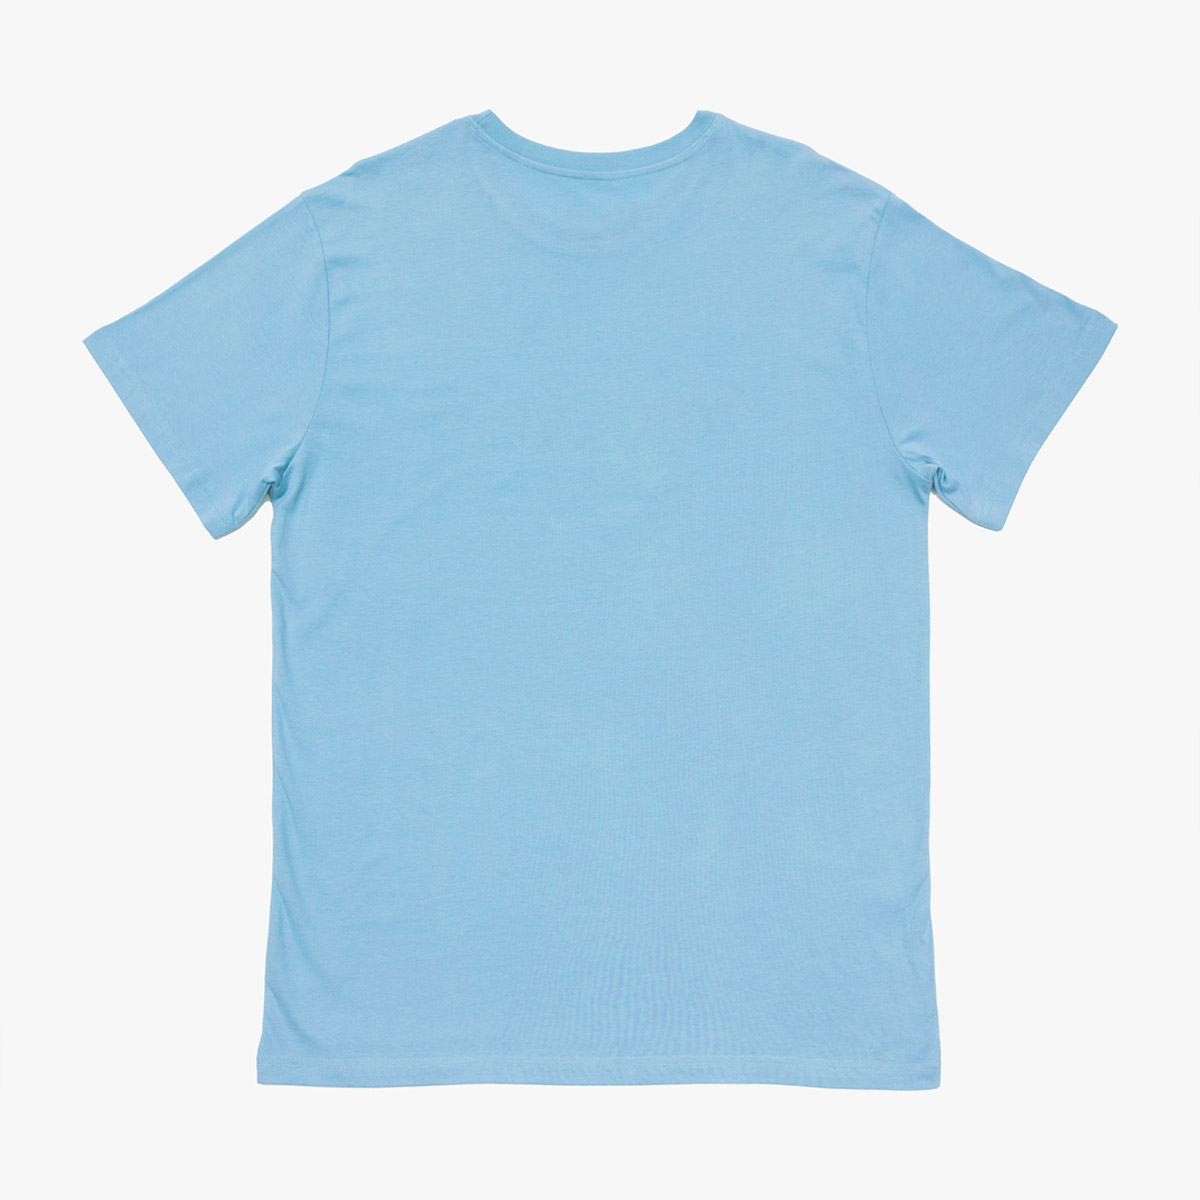 Adult Fit Pop of Color Tee in Airy Blue image number 3